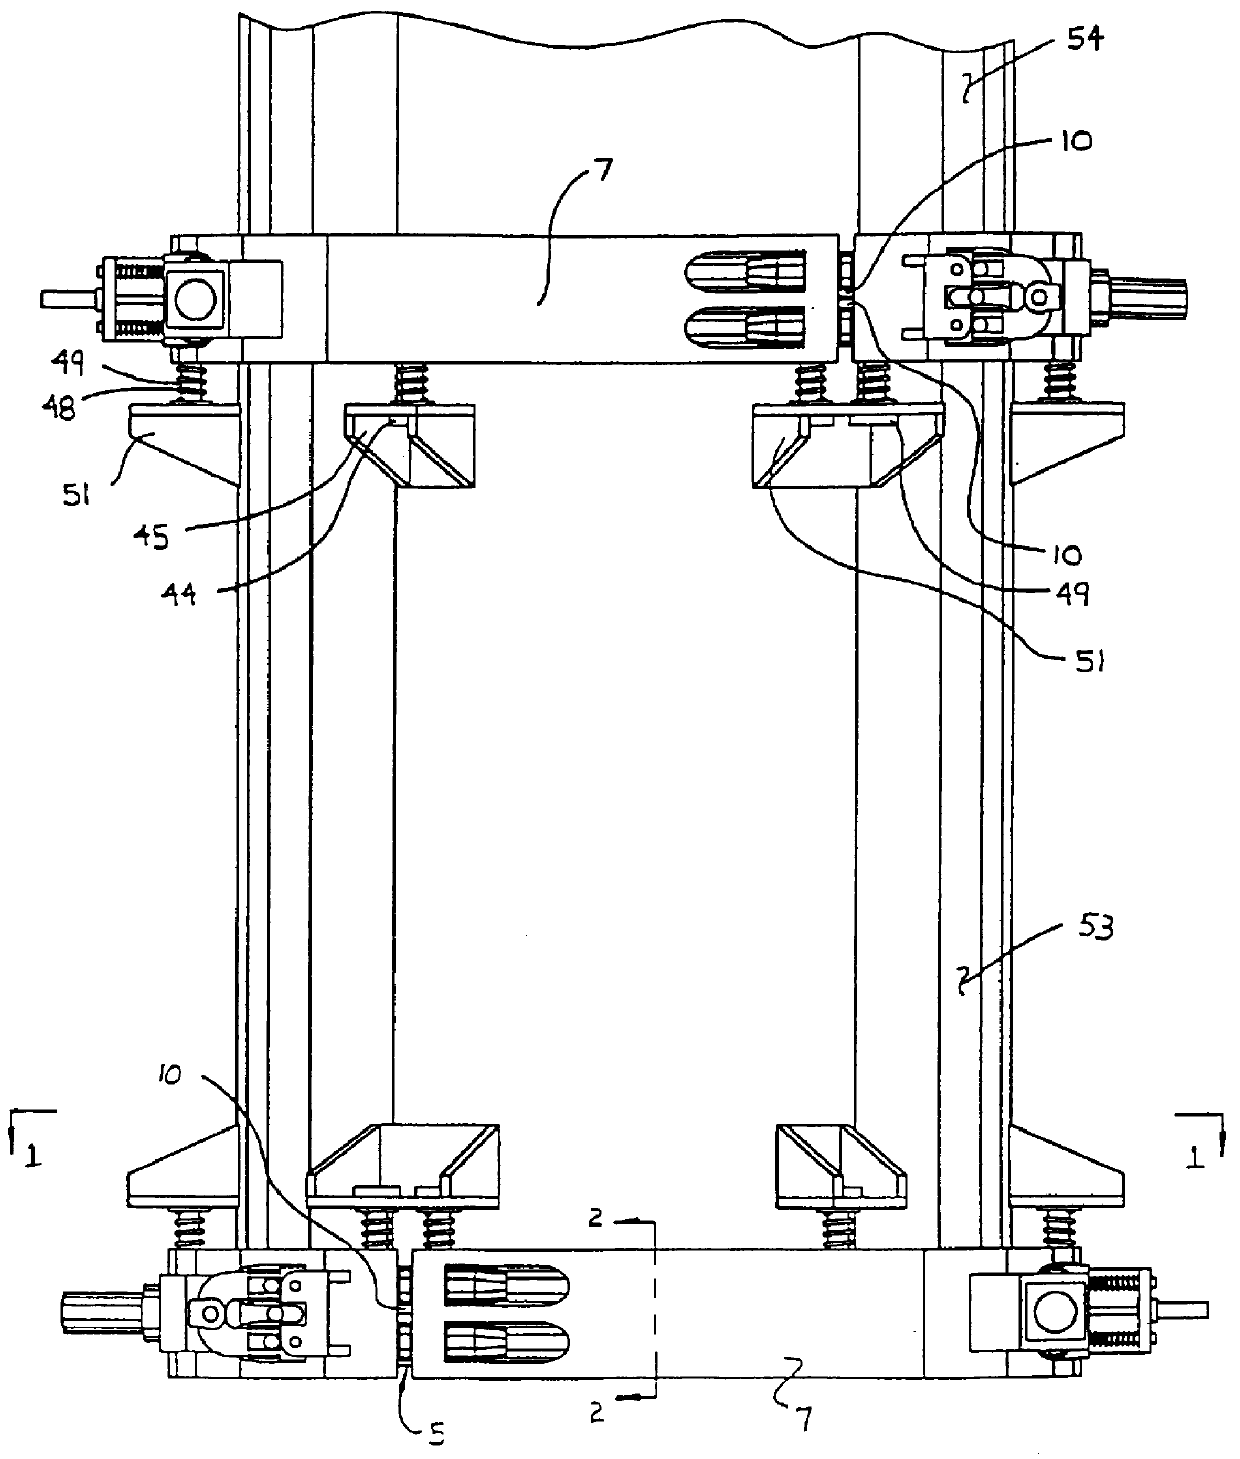 Remotely operable pressure vessel system